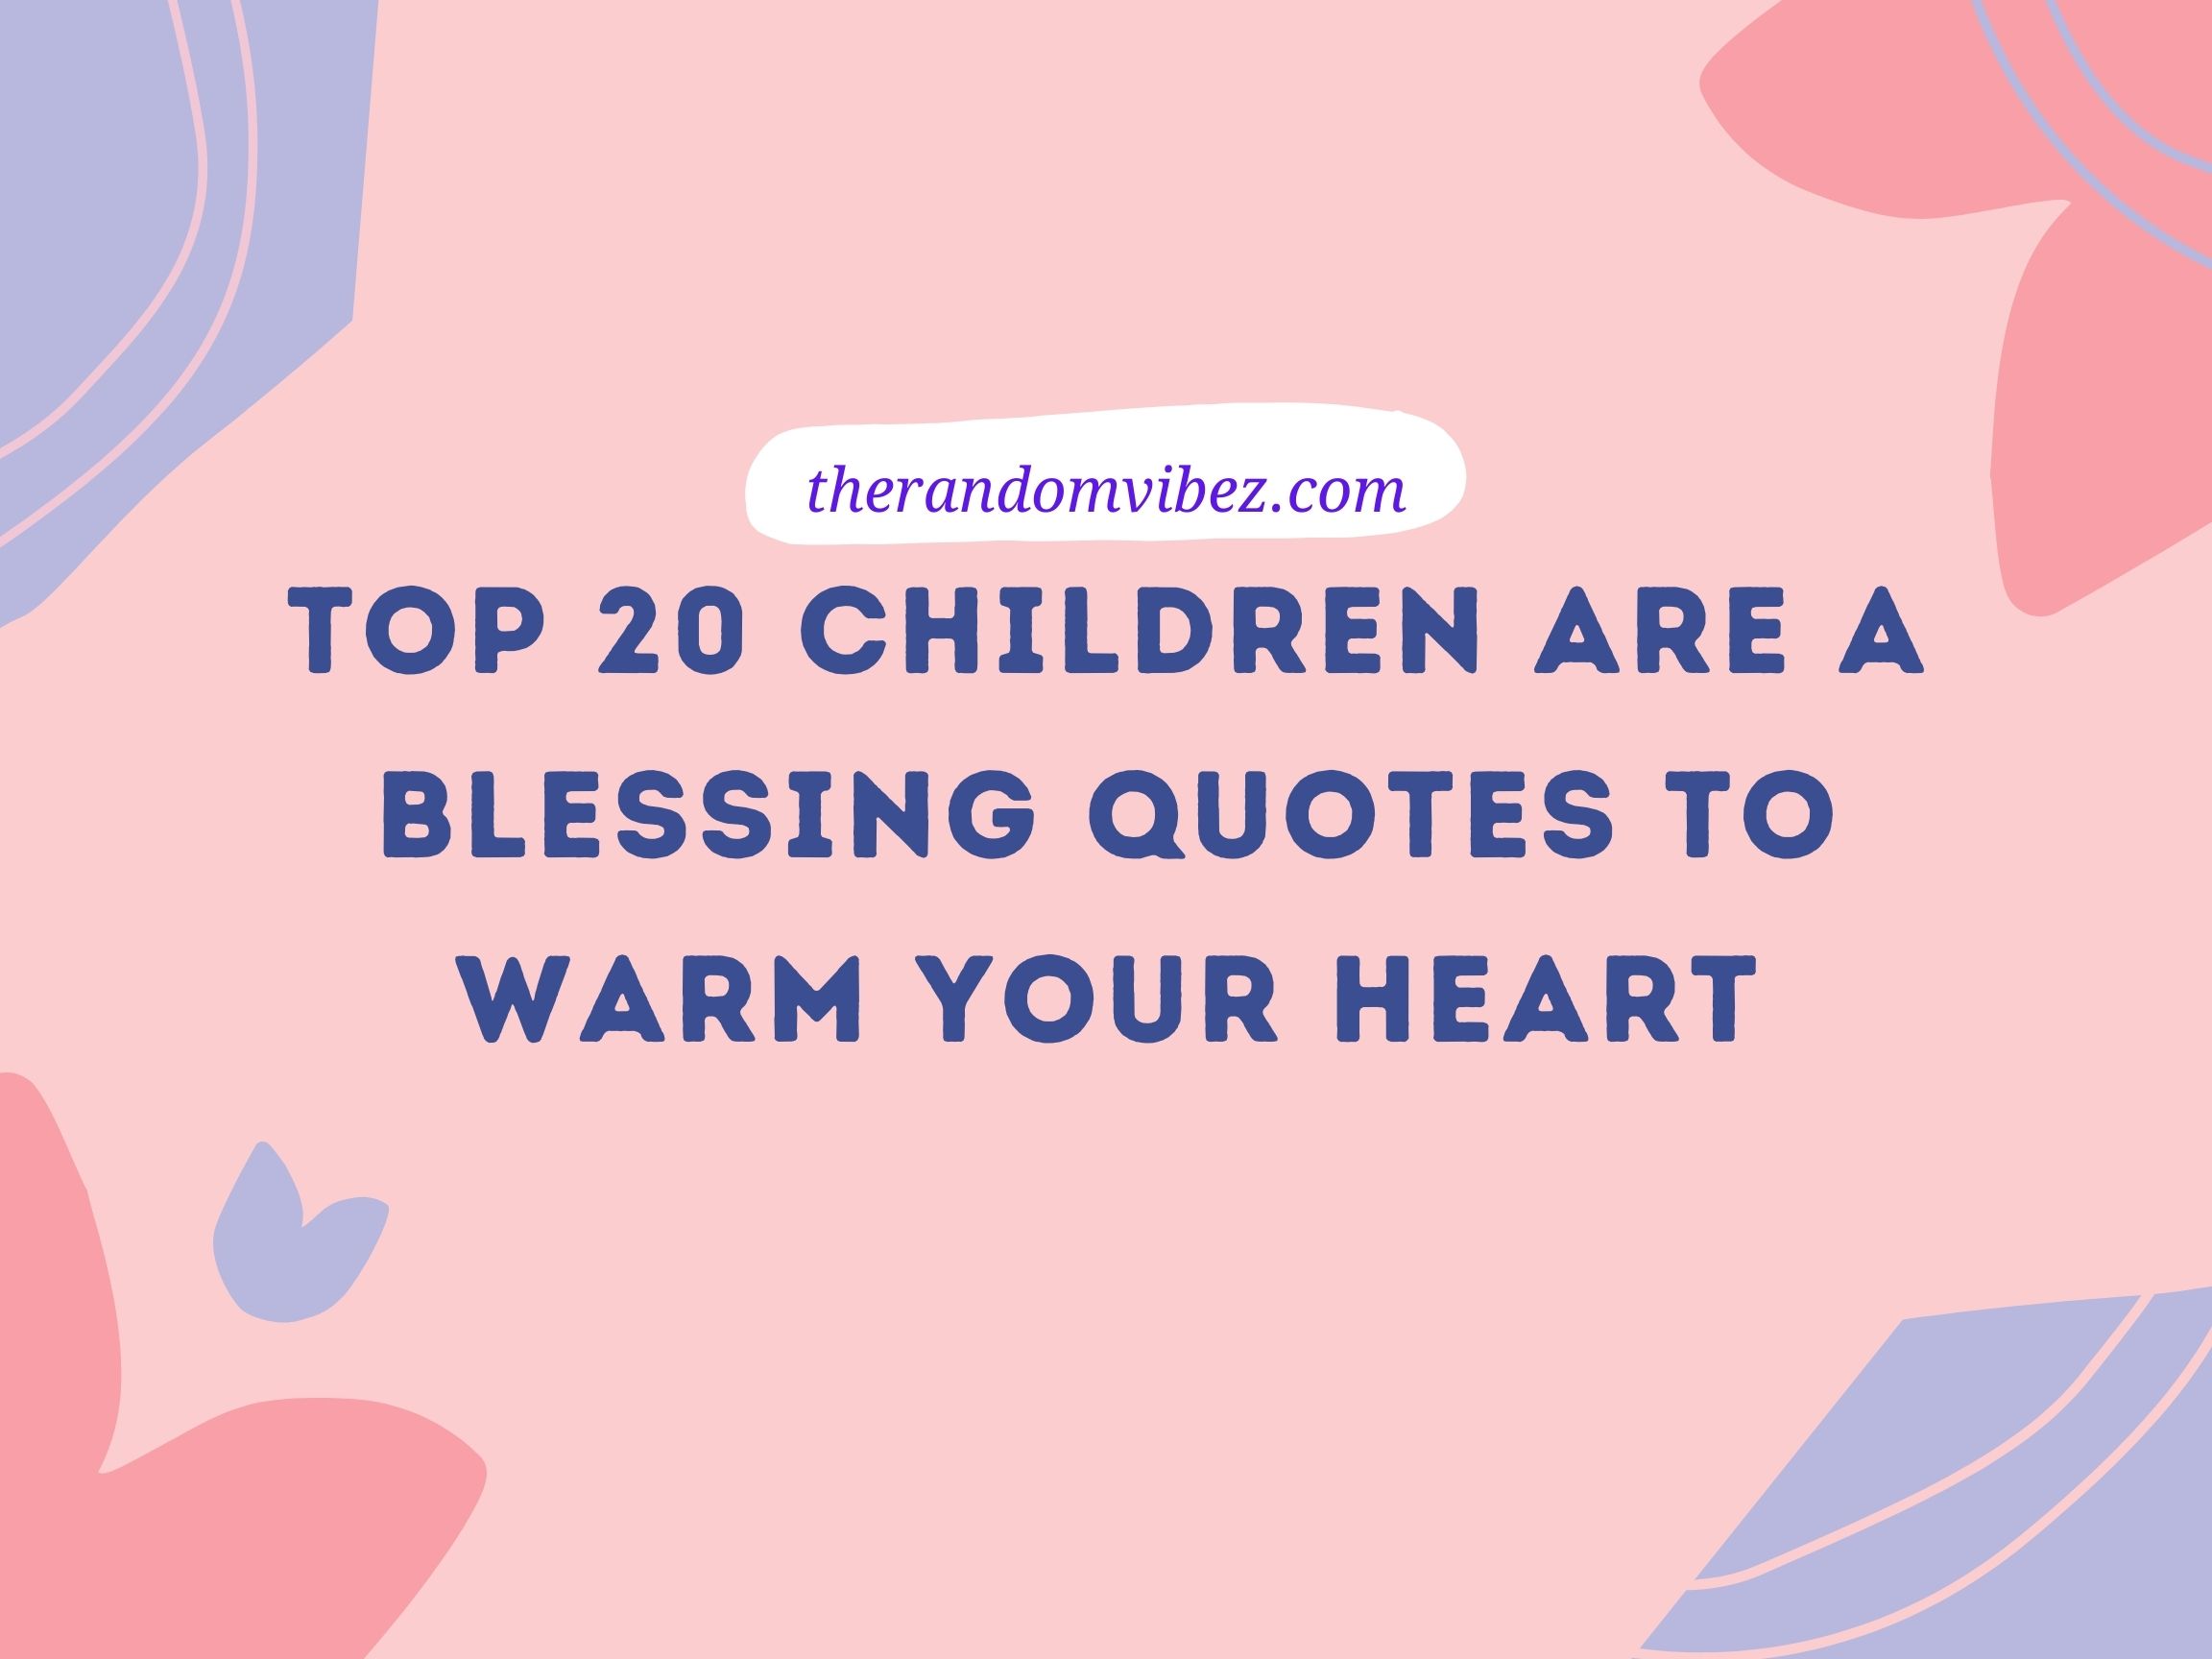 Top 20 Children Are a Blessing Quotes